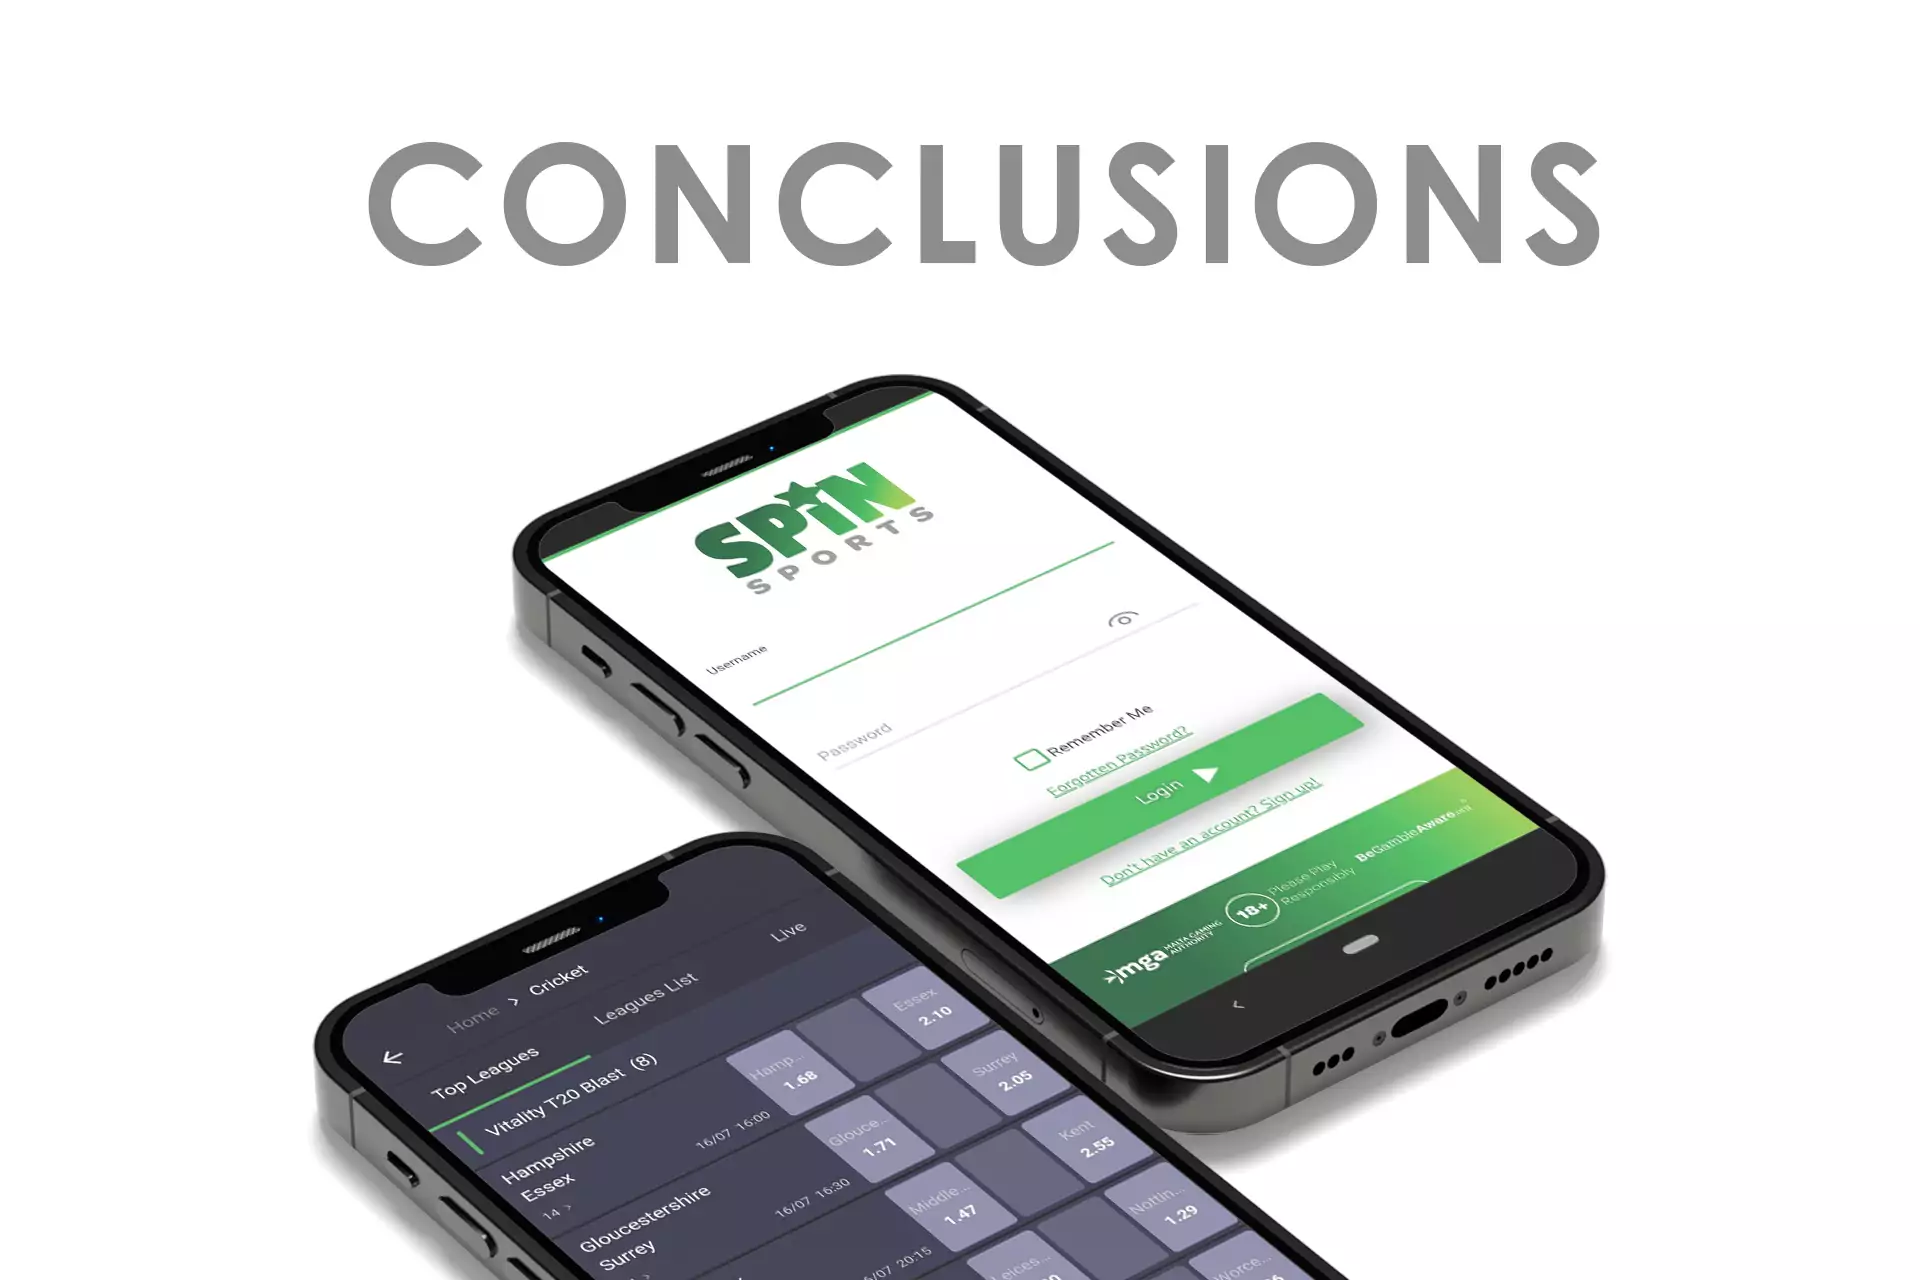 Read about the main benefits of the Spin Sports app in our conclusions.